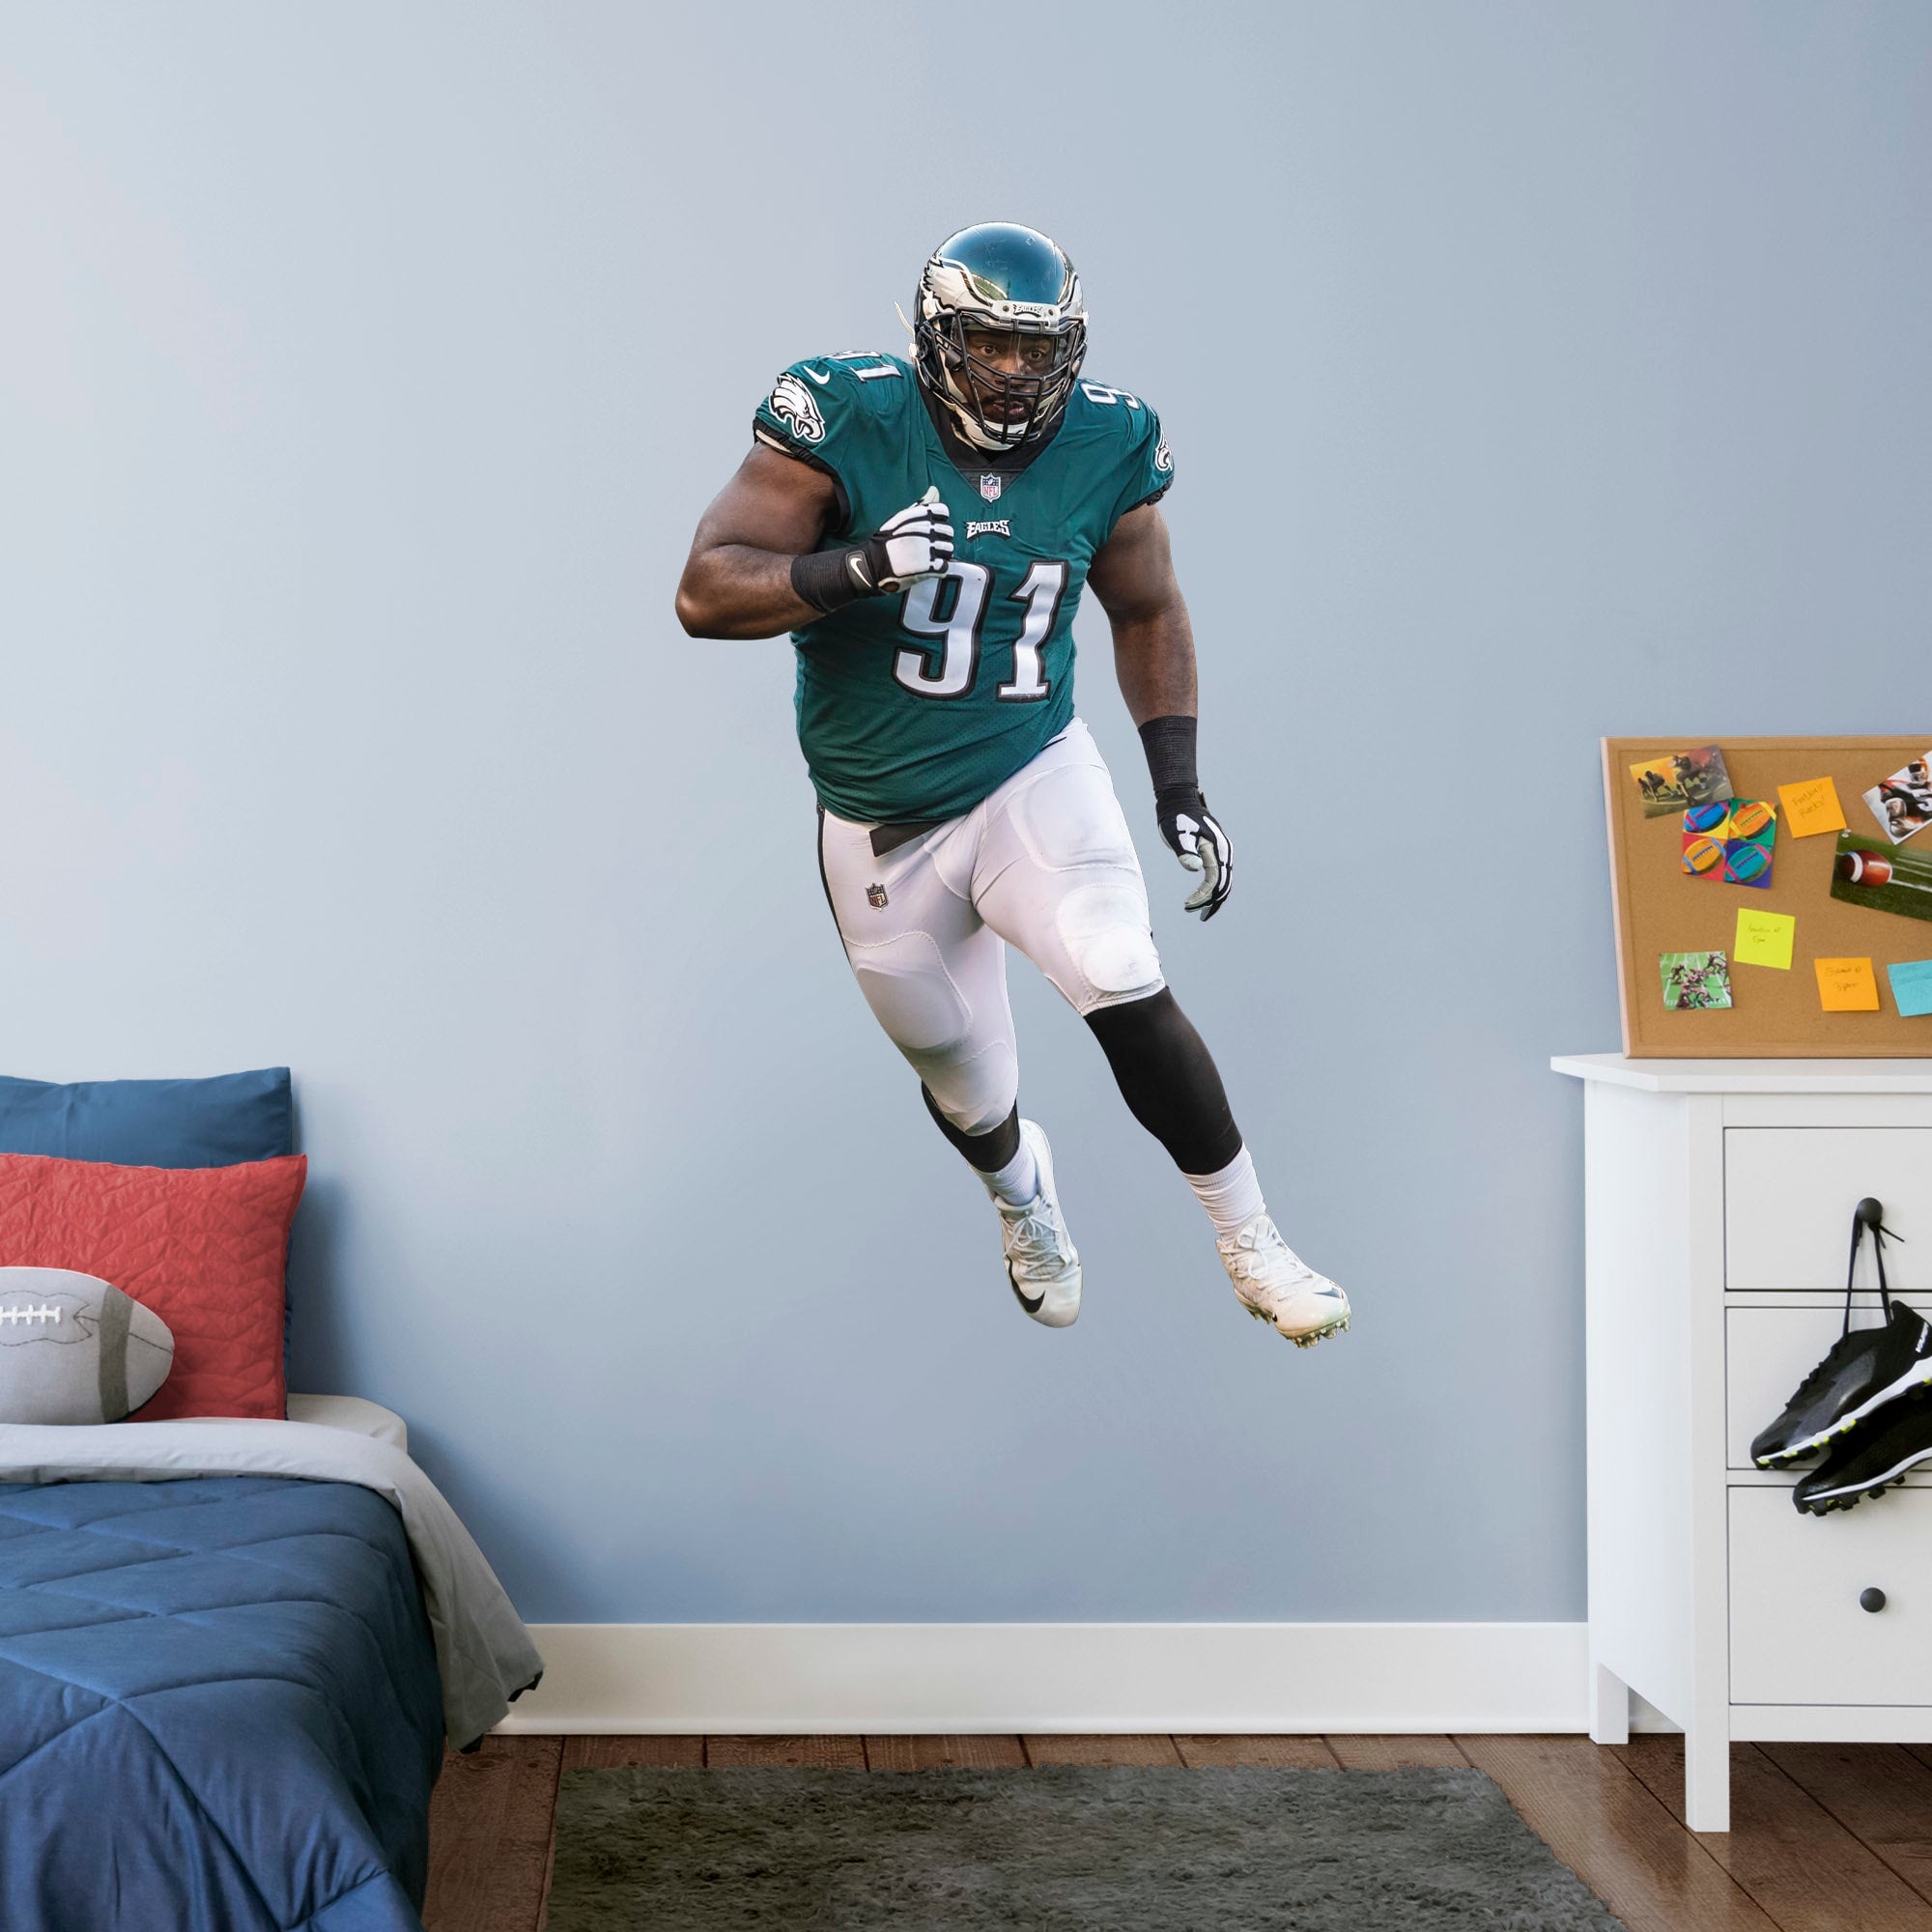 Fletcher Cox for Philadelphia Eagles - Officially Licensed NFL Removable Wall Decal Giant Athlete + 2 Decals (30"W x 51"H) by Fa